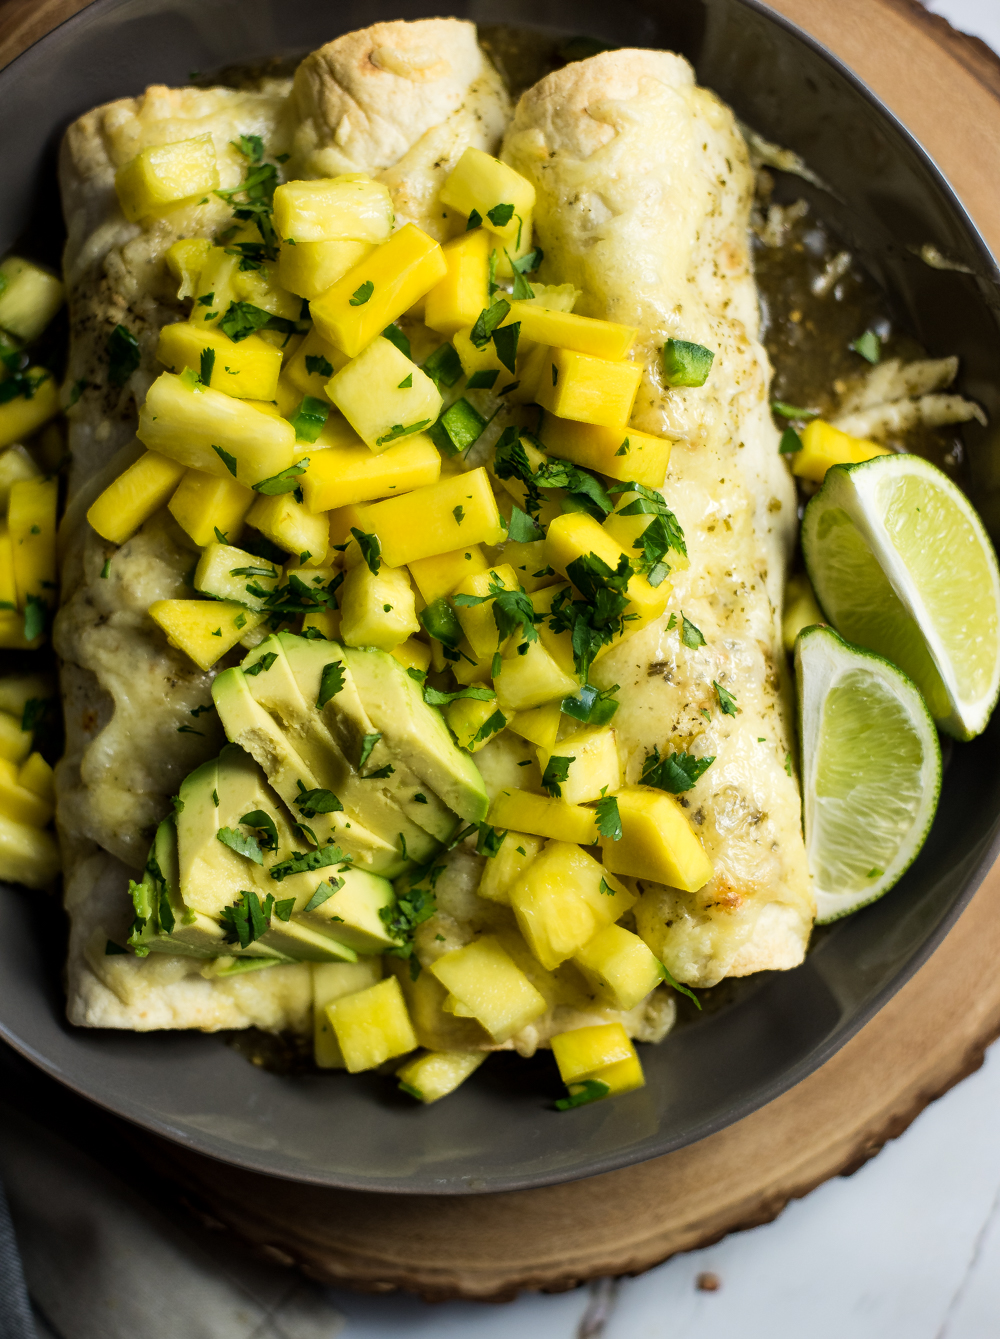 Take your enchiladas to the next level and make these tropical chipotle chicken enchiladas with mango salsa. They will be a hit at the dinner table!